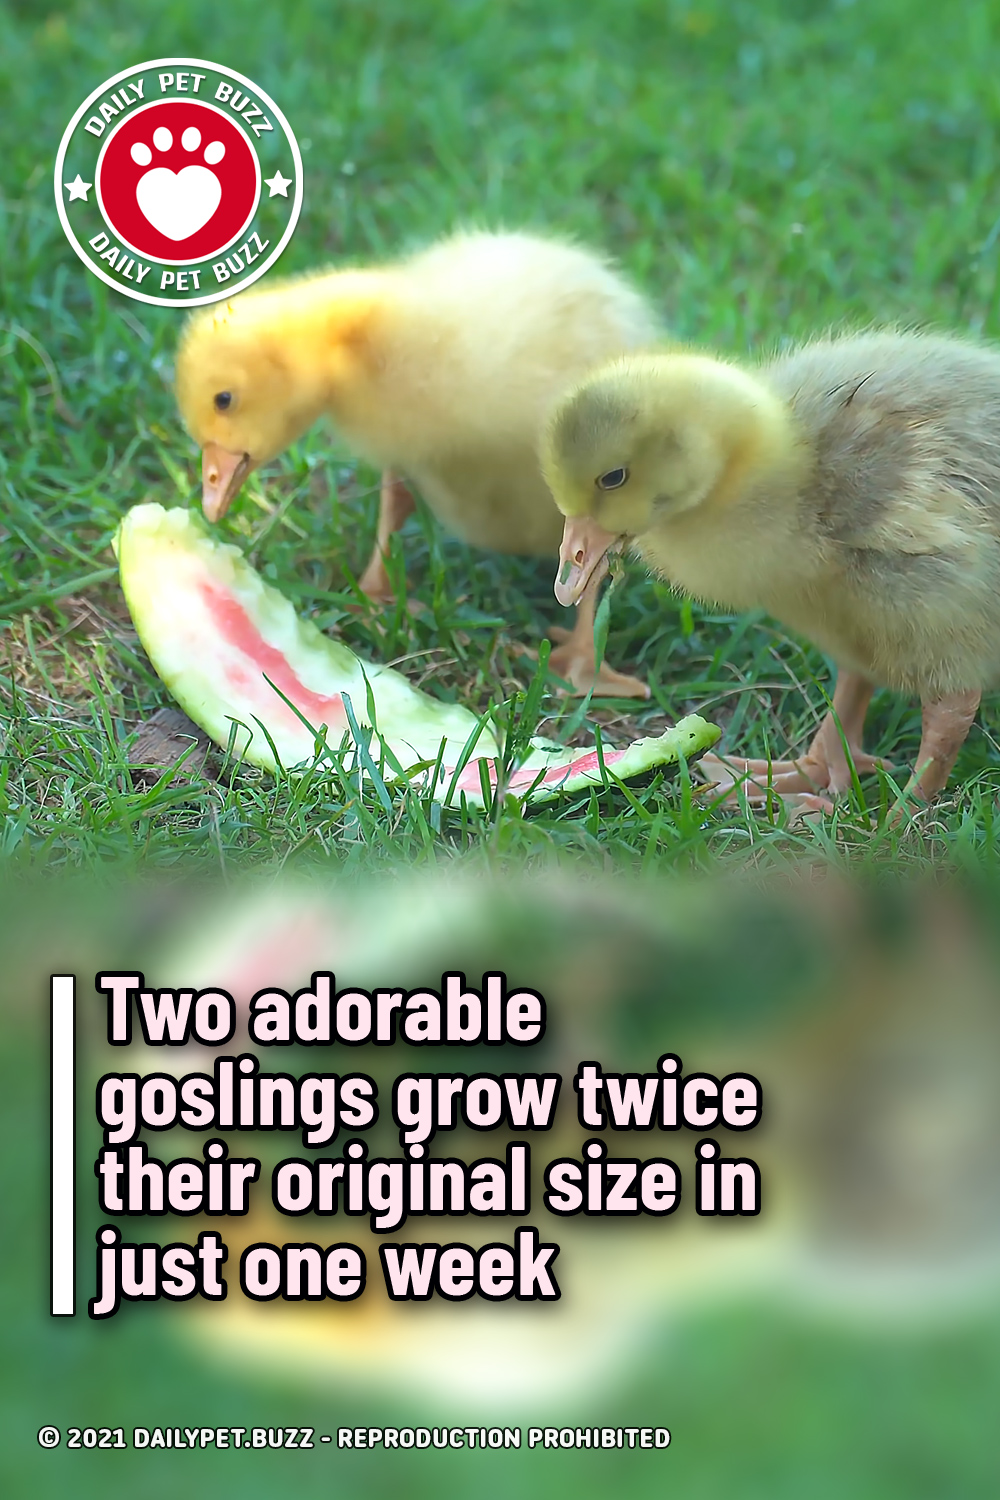 Two adorable goslings grow twice their original size in just one week